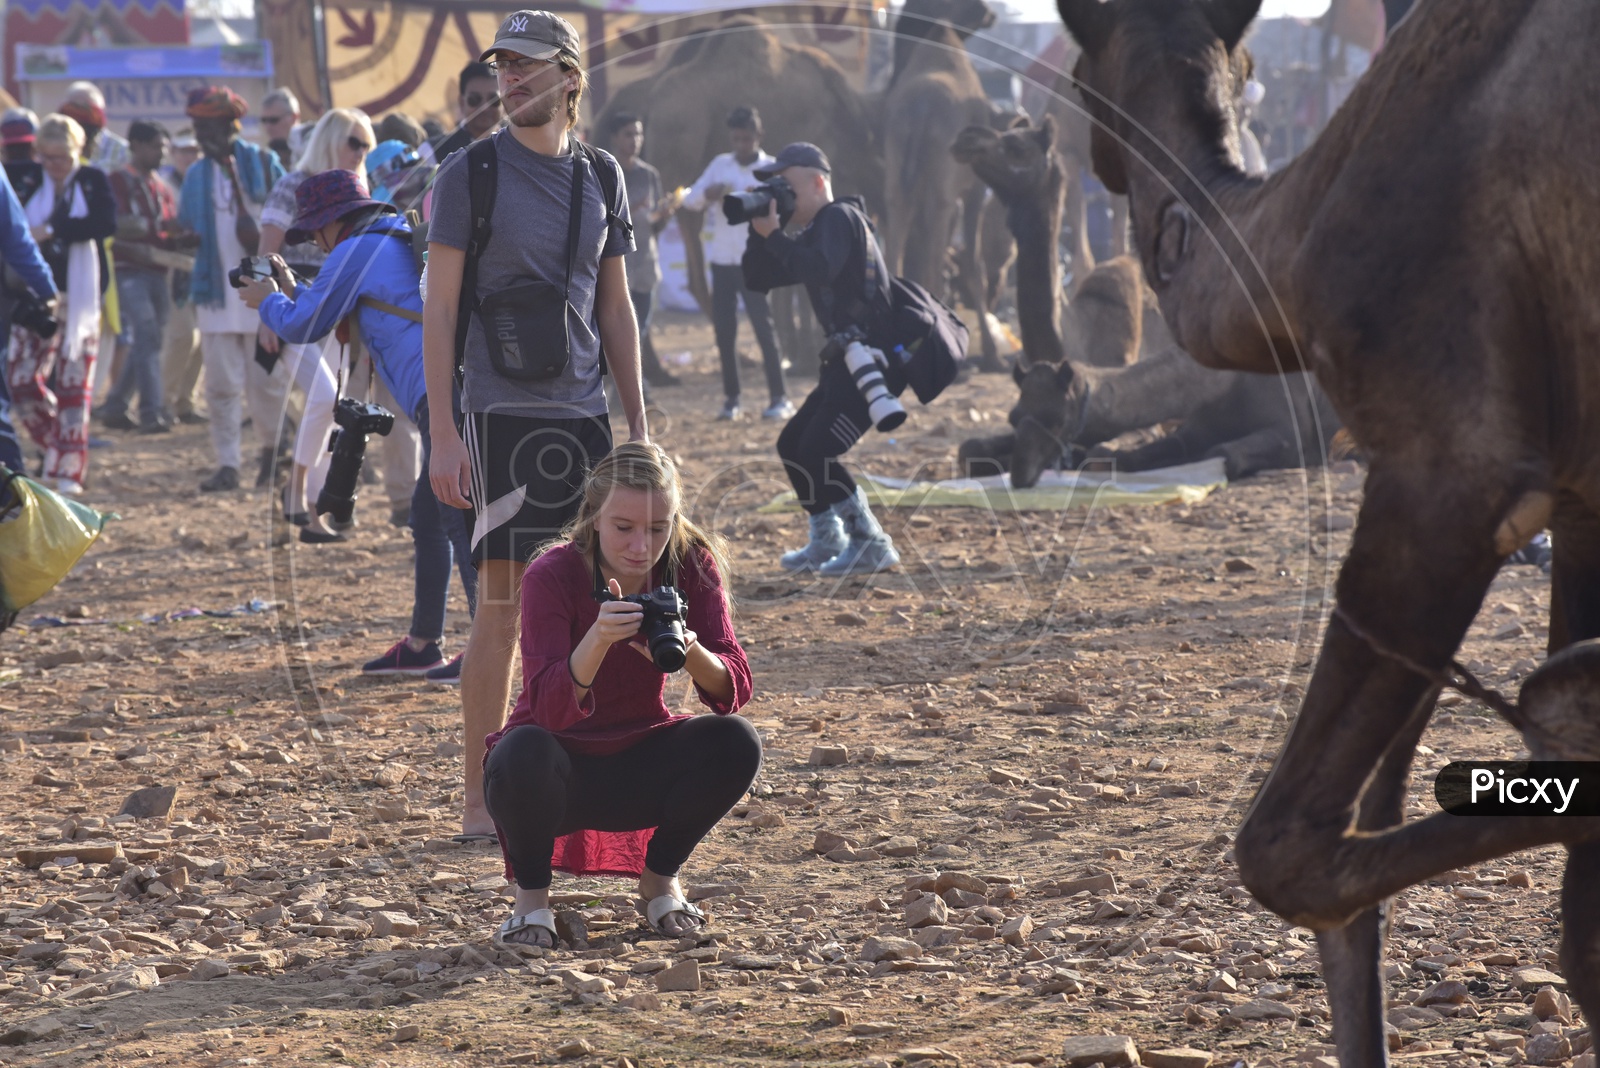 Foreign Tourist Taking Photo of Camels at Pushkar Camel Fair